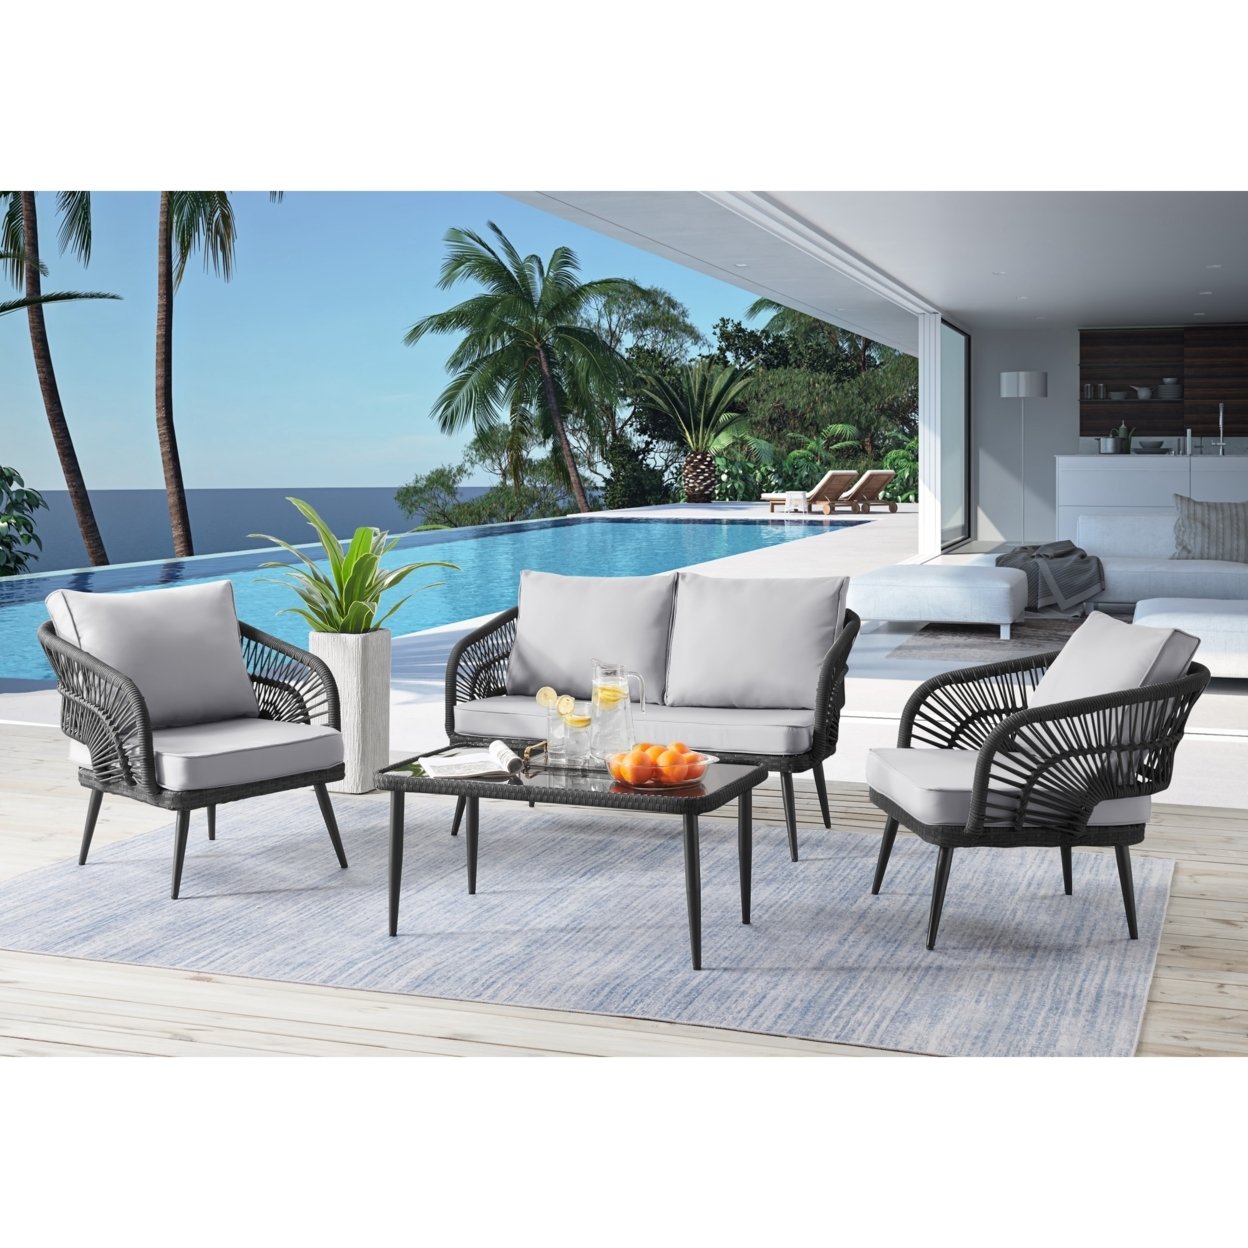 Javien Outdoor Set -All-Weather Faux Rattan Wicker Design, Removable And Washable Cushions - Black/4 Seating